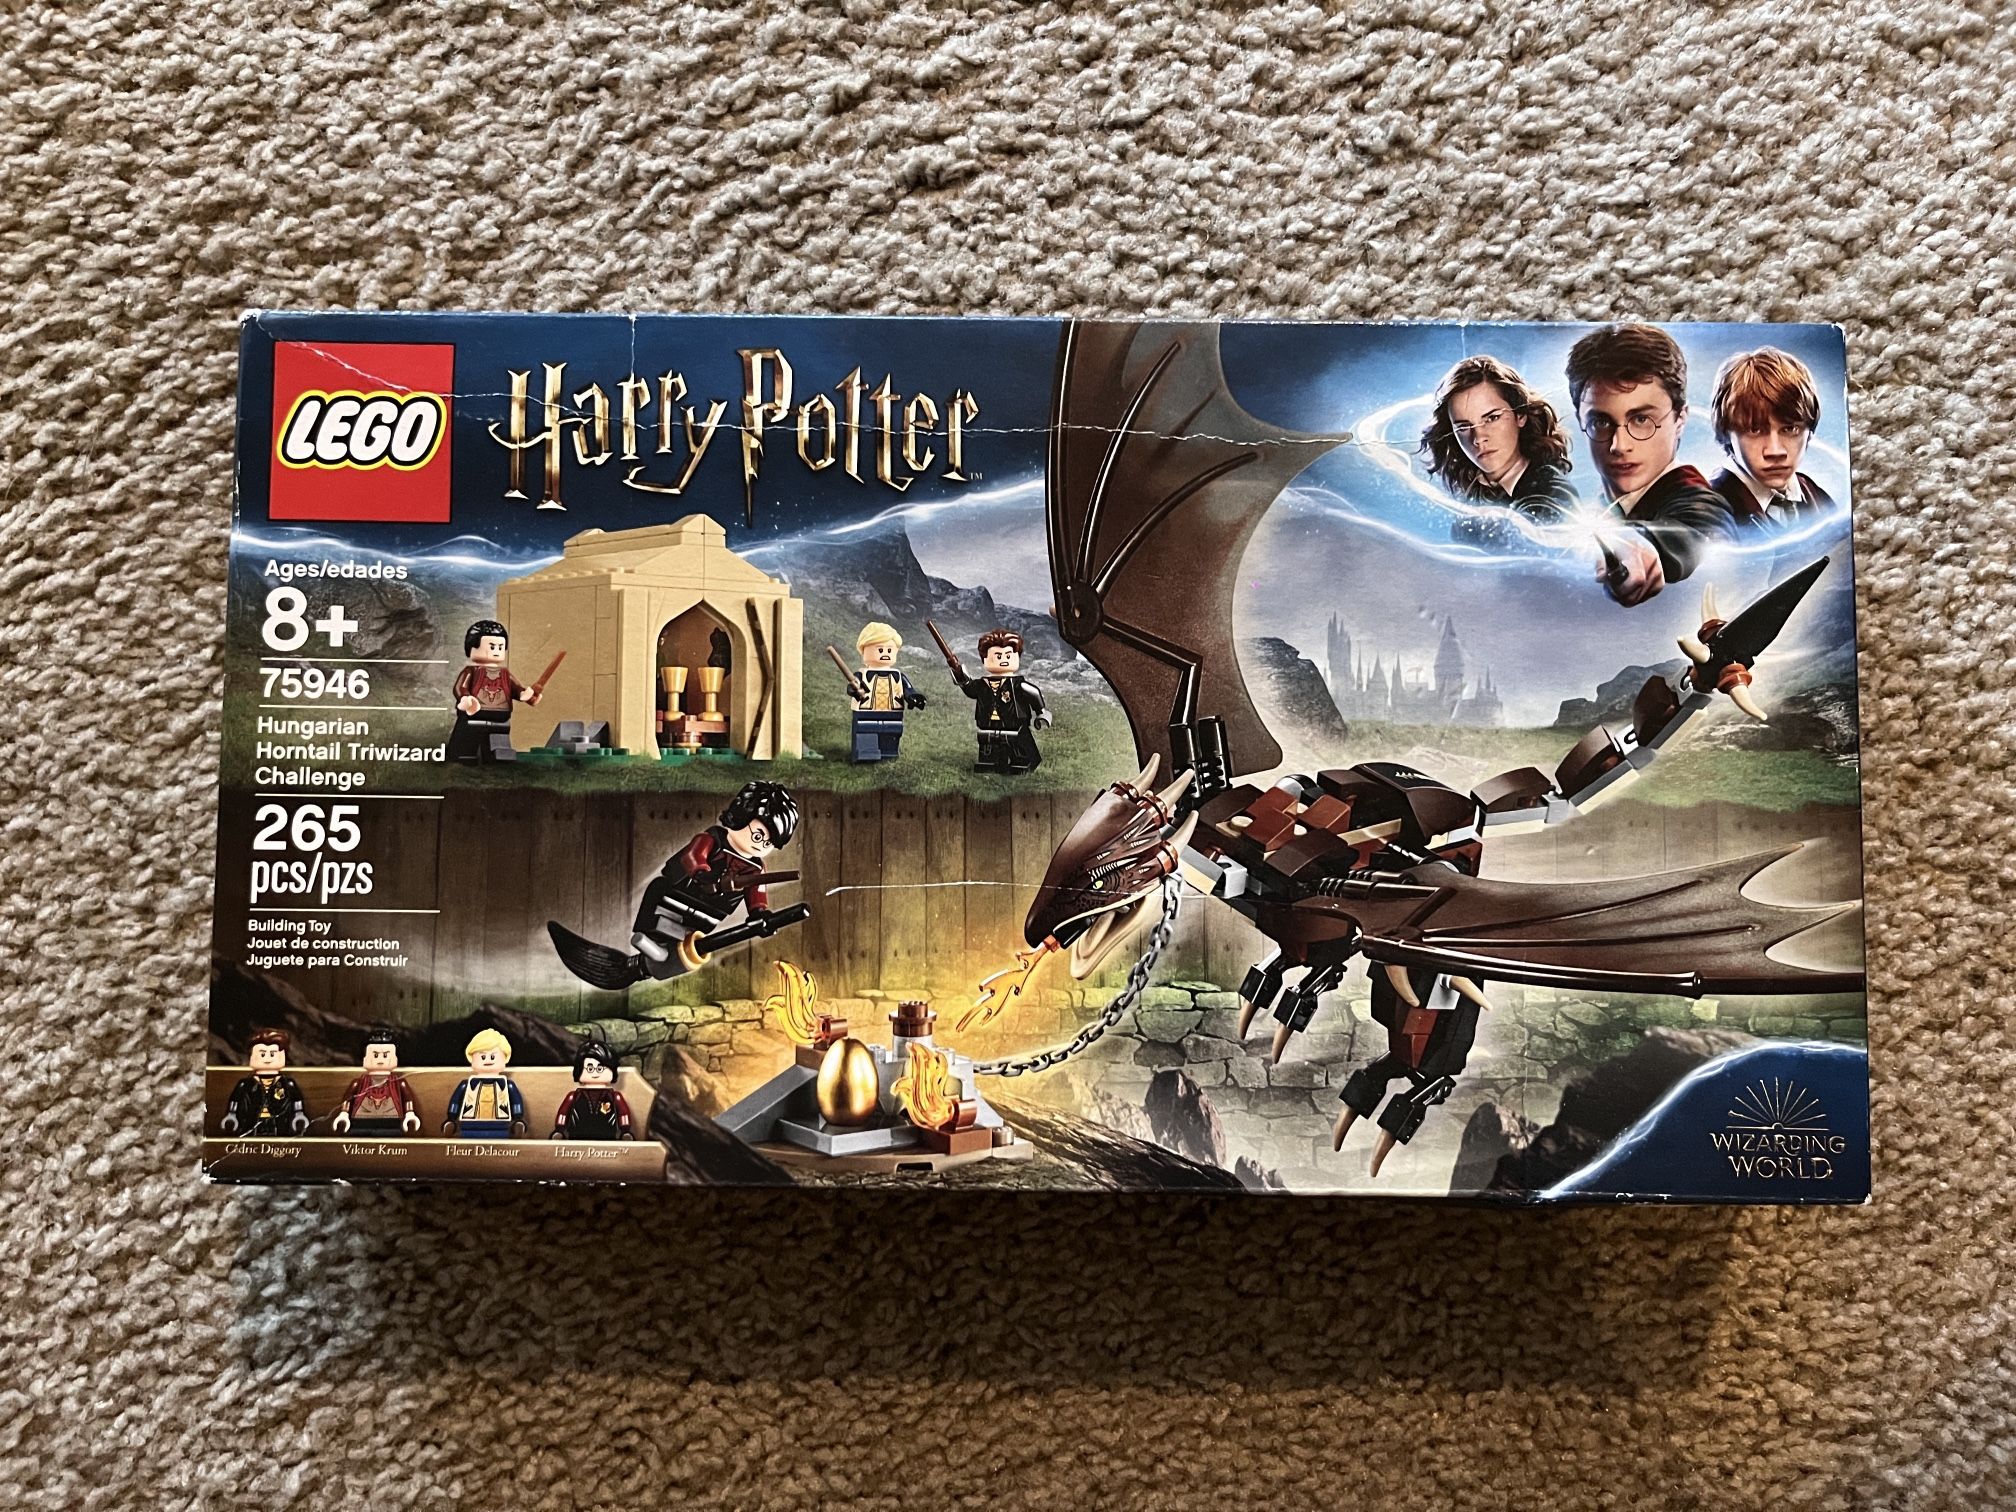 Harry Potter hungarian horntail Lego